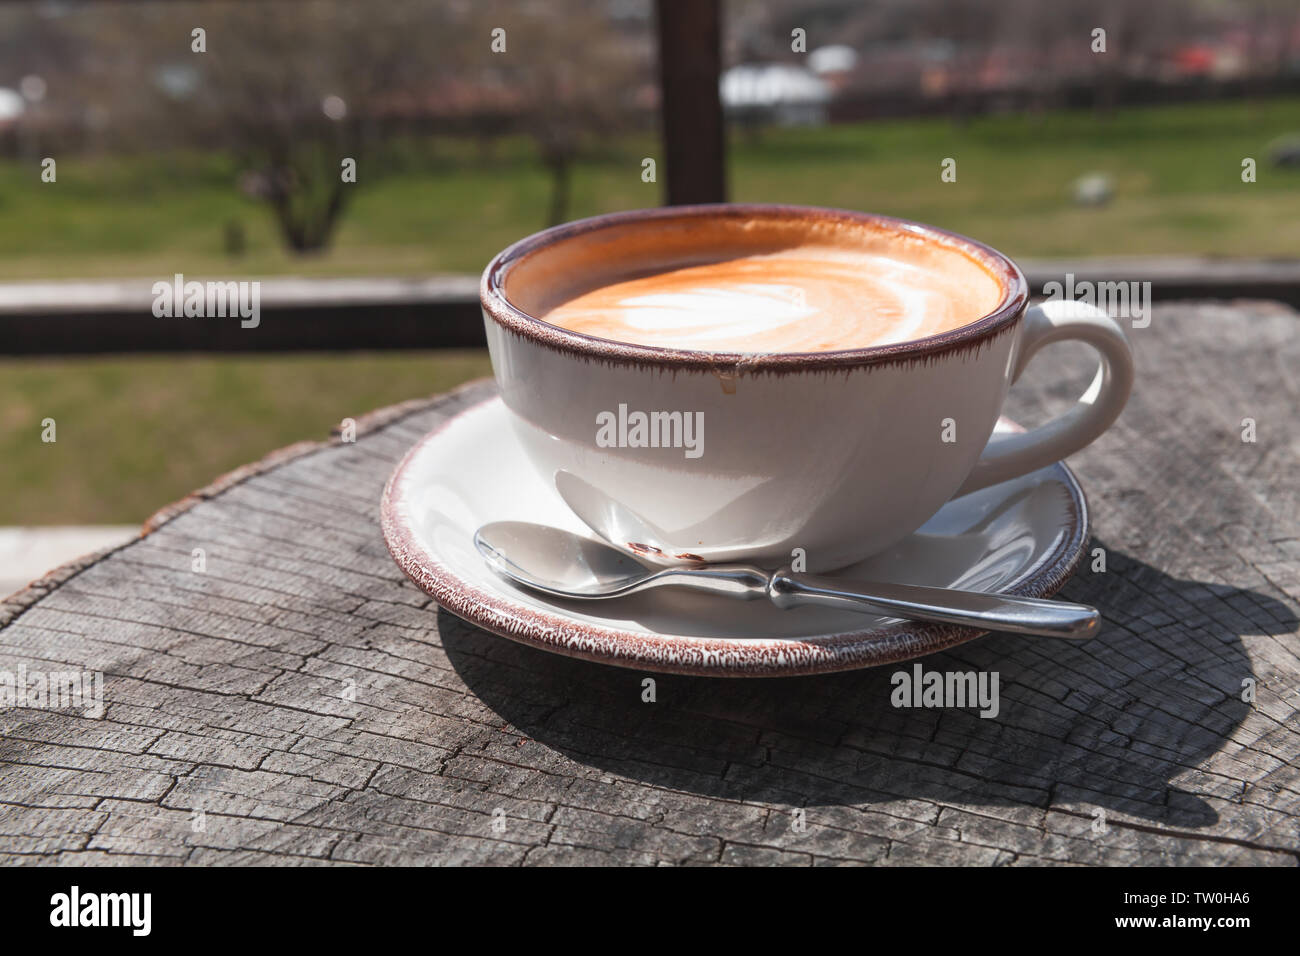 Cappuccino. Cup of coffee with milk foam stands on wooden table Stock Photo